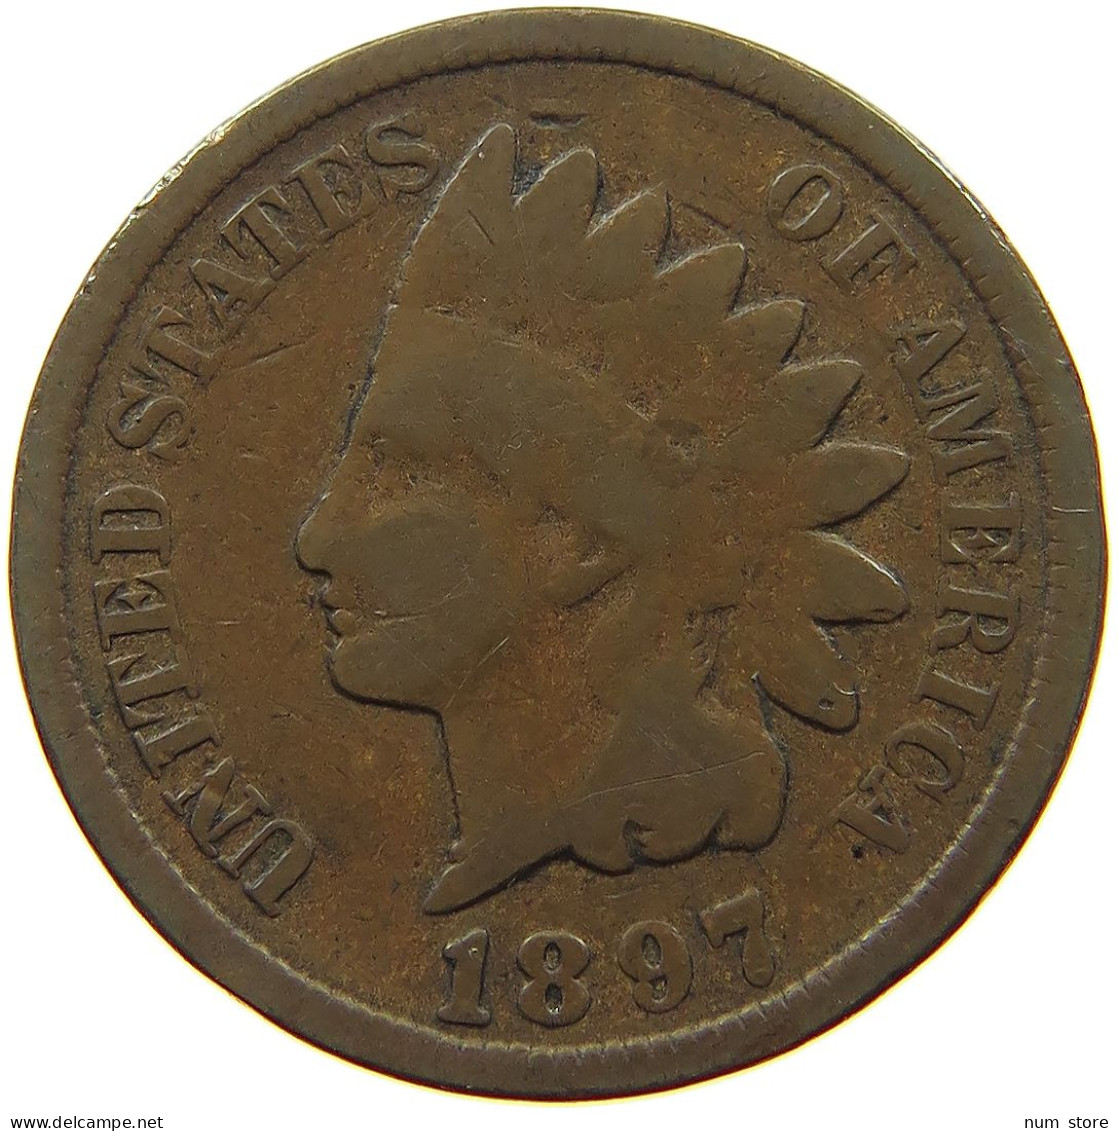 UNITED STATES OF AMERICA CENT 1897 INDIAN HEAD #s063 0333 - 1859-1909: Indian Head